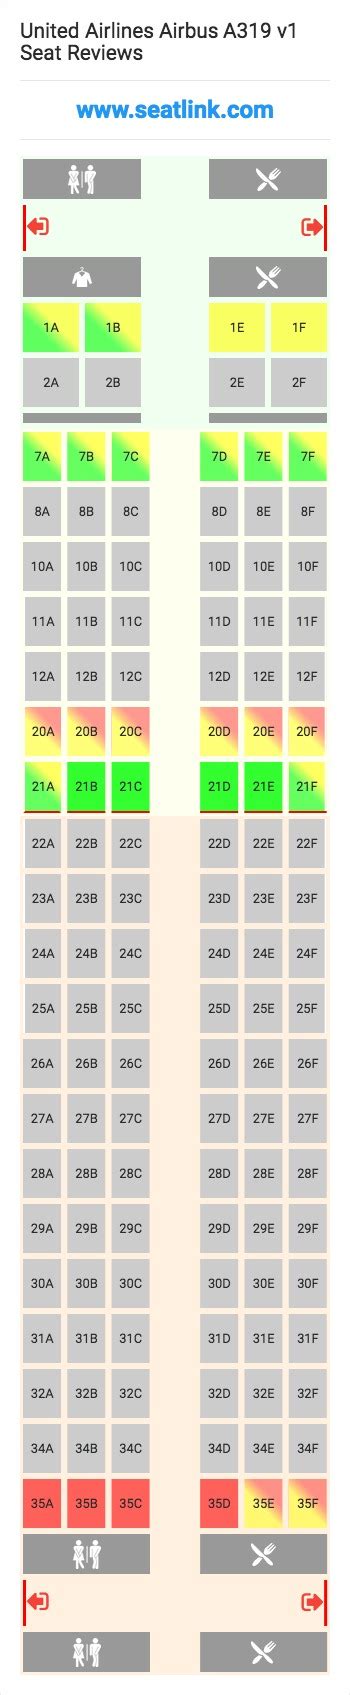 United Airlines Airbus A319 V1 Seating Chart Updated April 2022